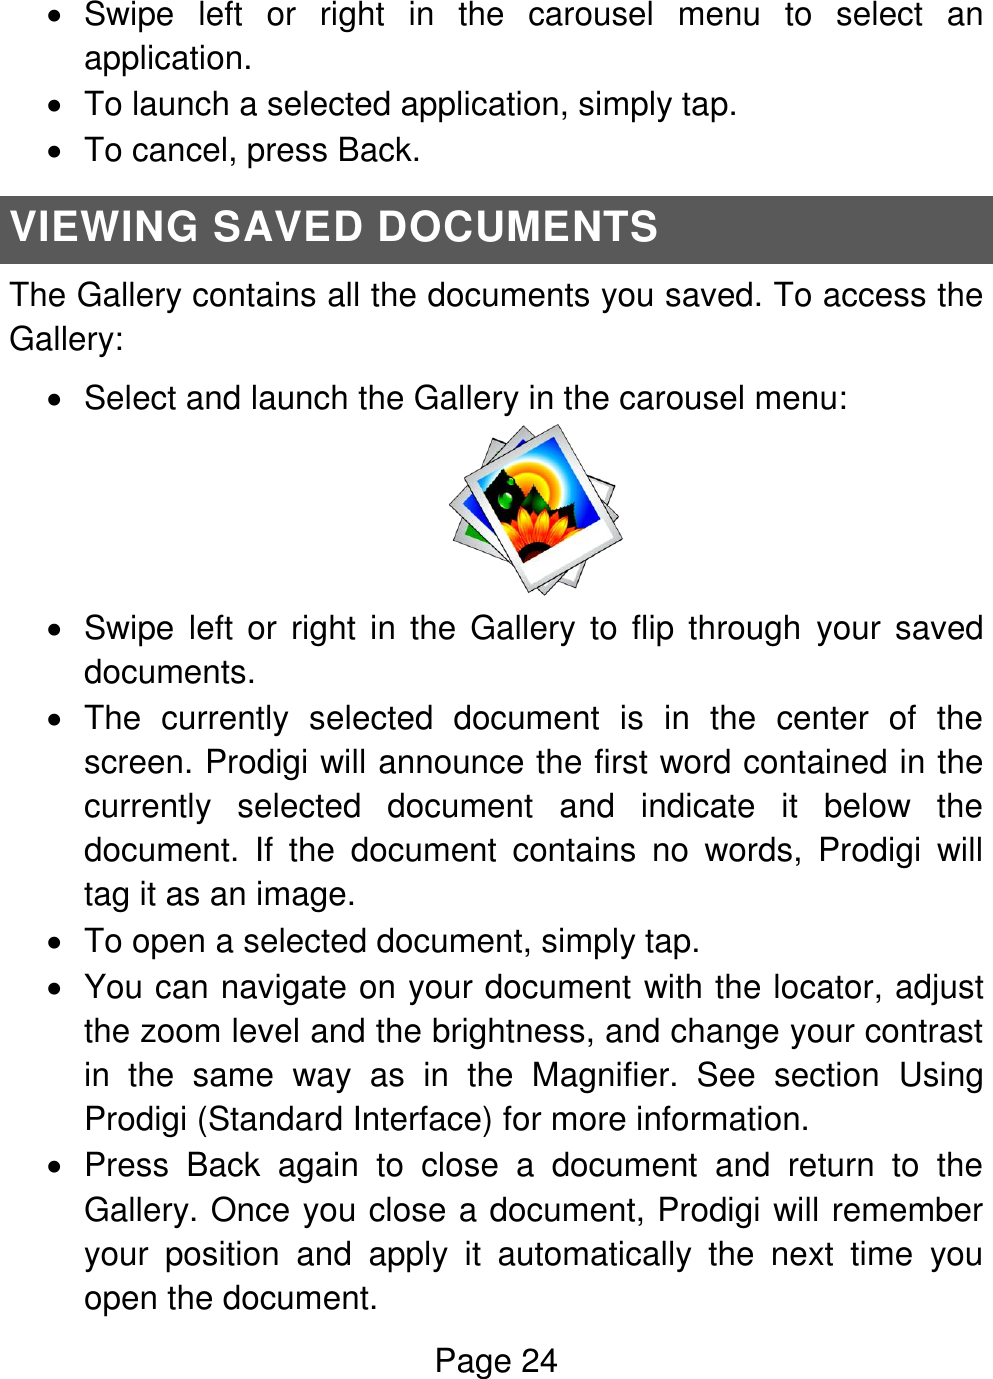 Page 24    Swipe  left  or  right  in  the  carousel  menu  to  select  an application.   To launch a selected application, simply tap.   To cancel, press Back. VIEWING SAVED DOCUMENTS The Gallery contains all the documents you saved. To access the Gallery:   Select and launch the Gallery in the carousel menu:    Swipe left or right in the Gallery to flip through  your saved documents.    The  currently  selected  document  is  in  the  center  of  the screen. Prodigi will announce the first word contained in the currently  selected  document  and  indicate  it  below  the document.  If  the  document  contains  no  words,  Prodigi  will tag it as an image.    To open a selected document, simply tap.   You can navigate on your document with the locator, adjust the zoom level and the brightness, and change your contrast in  the  same  way  as  in  the  Magnifier.  See  section  Using Prodigi (Standard Interface) for more information.   Press  Back  again  to  close  a  document  and  return  to  the Gallery. Once you close a document, Prodigi will remember your  position  and  apply  it  automatically  the  next  time  you open the document. 